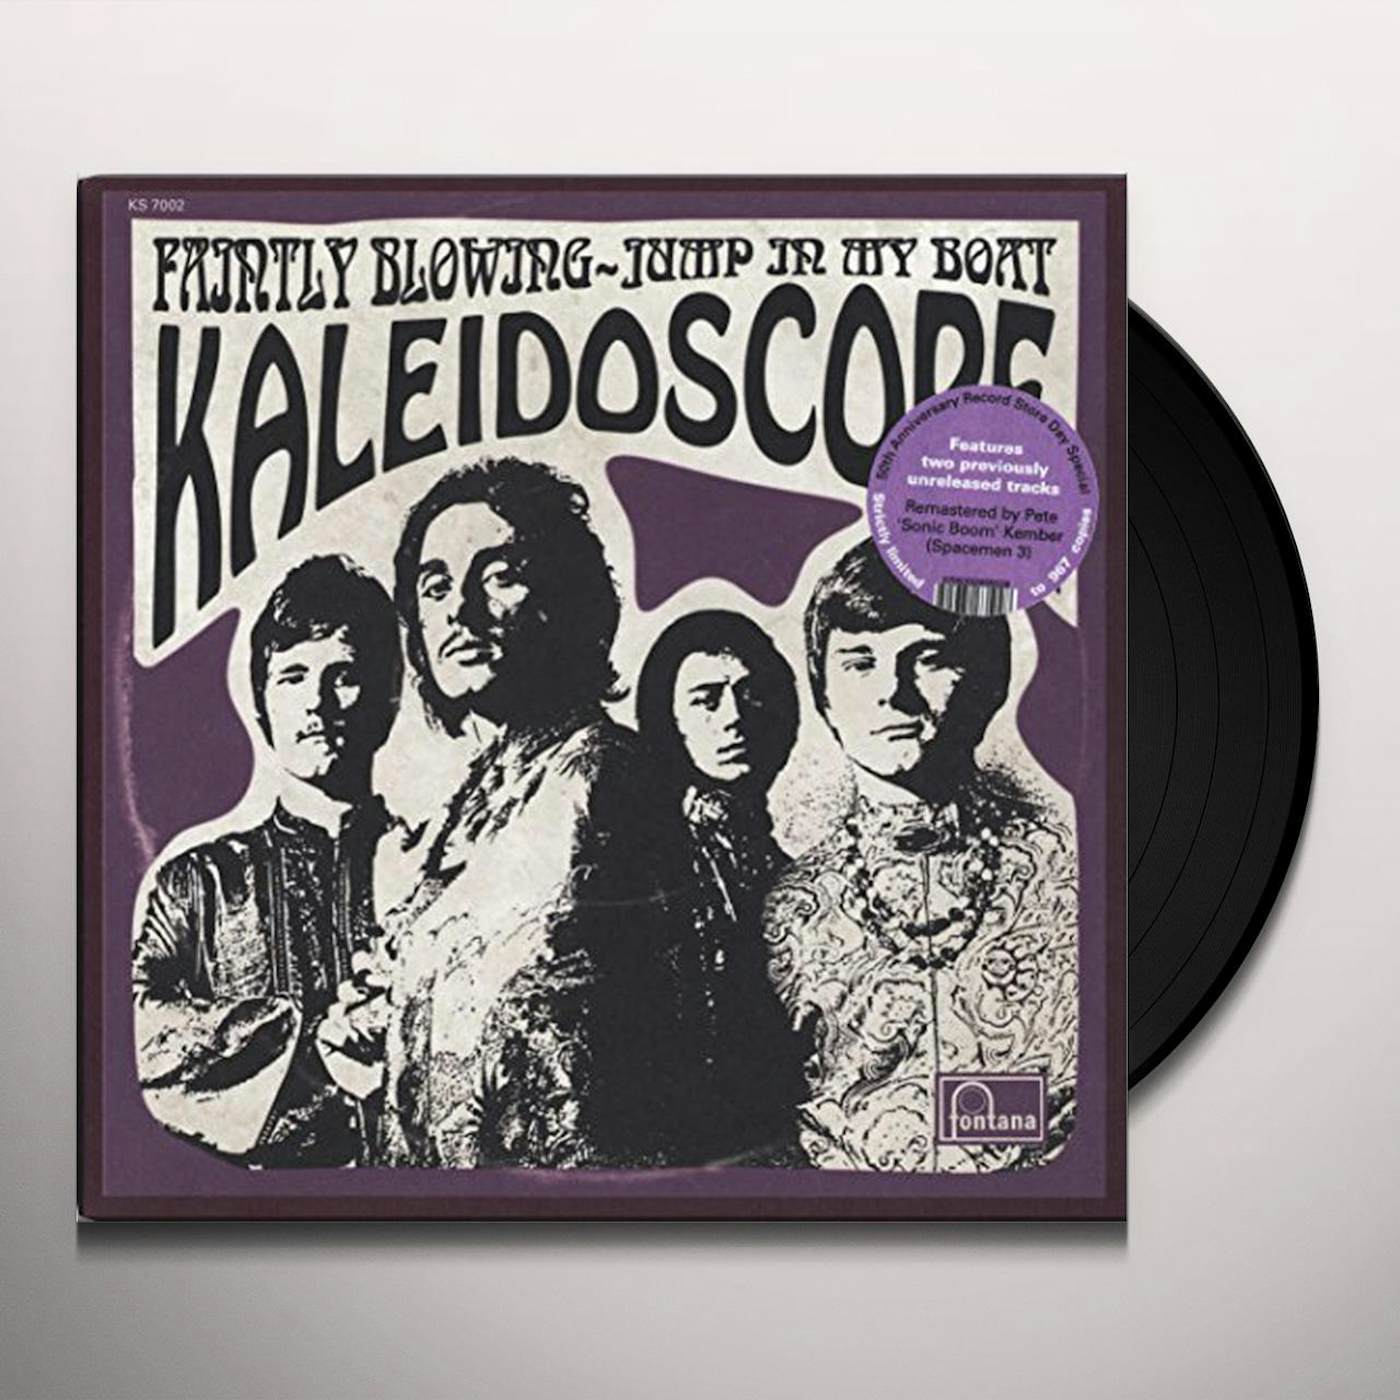 Kaleidoscope FAINTLY BLOWING JUMP IN MY BOAT Vinyl Record